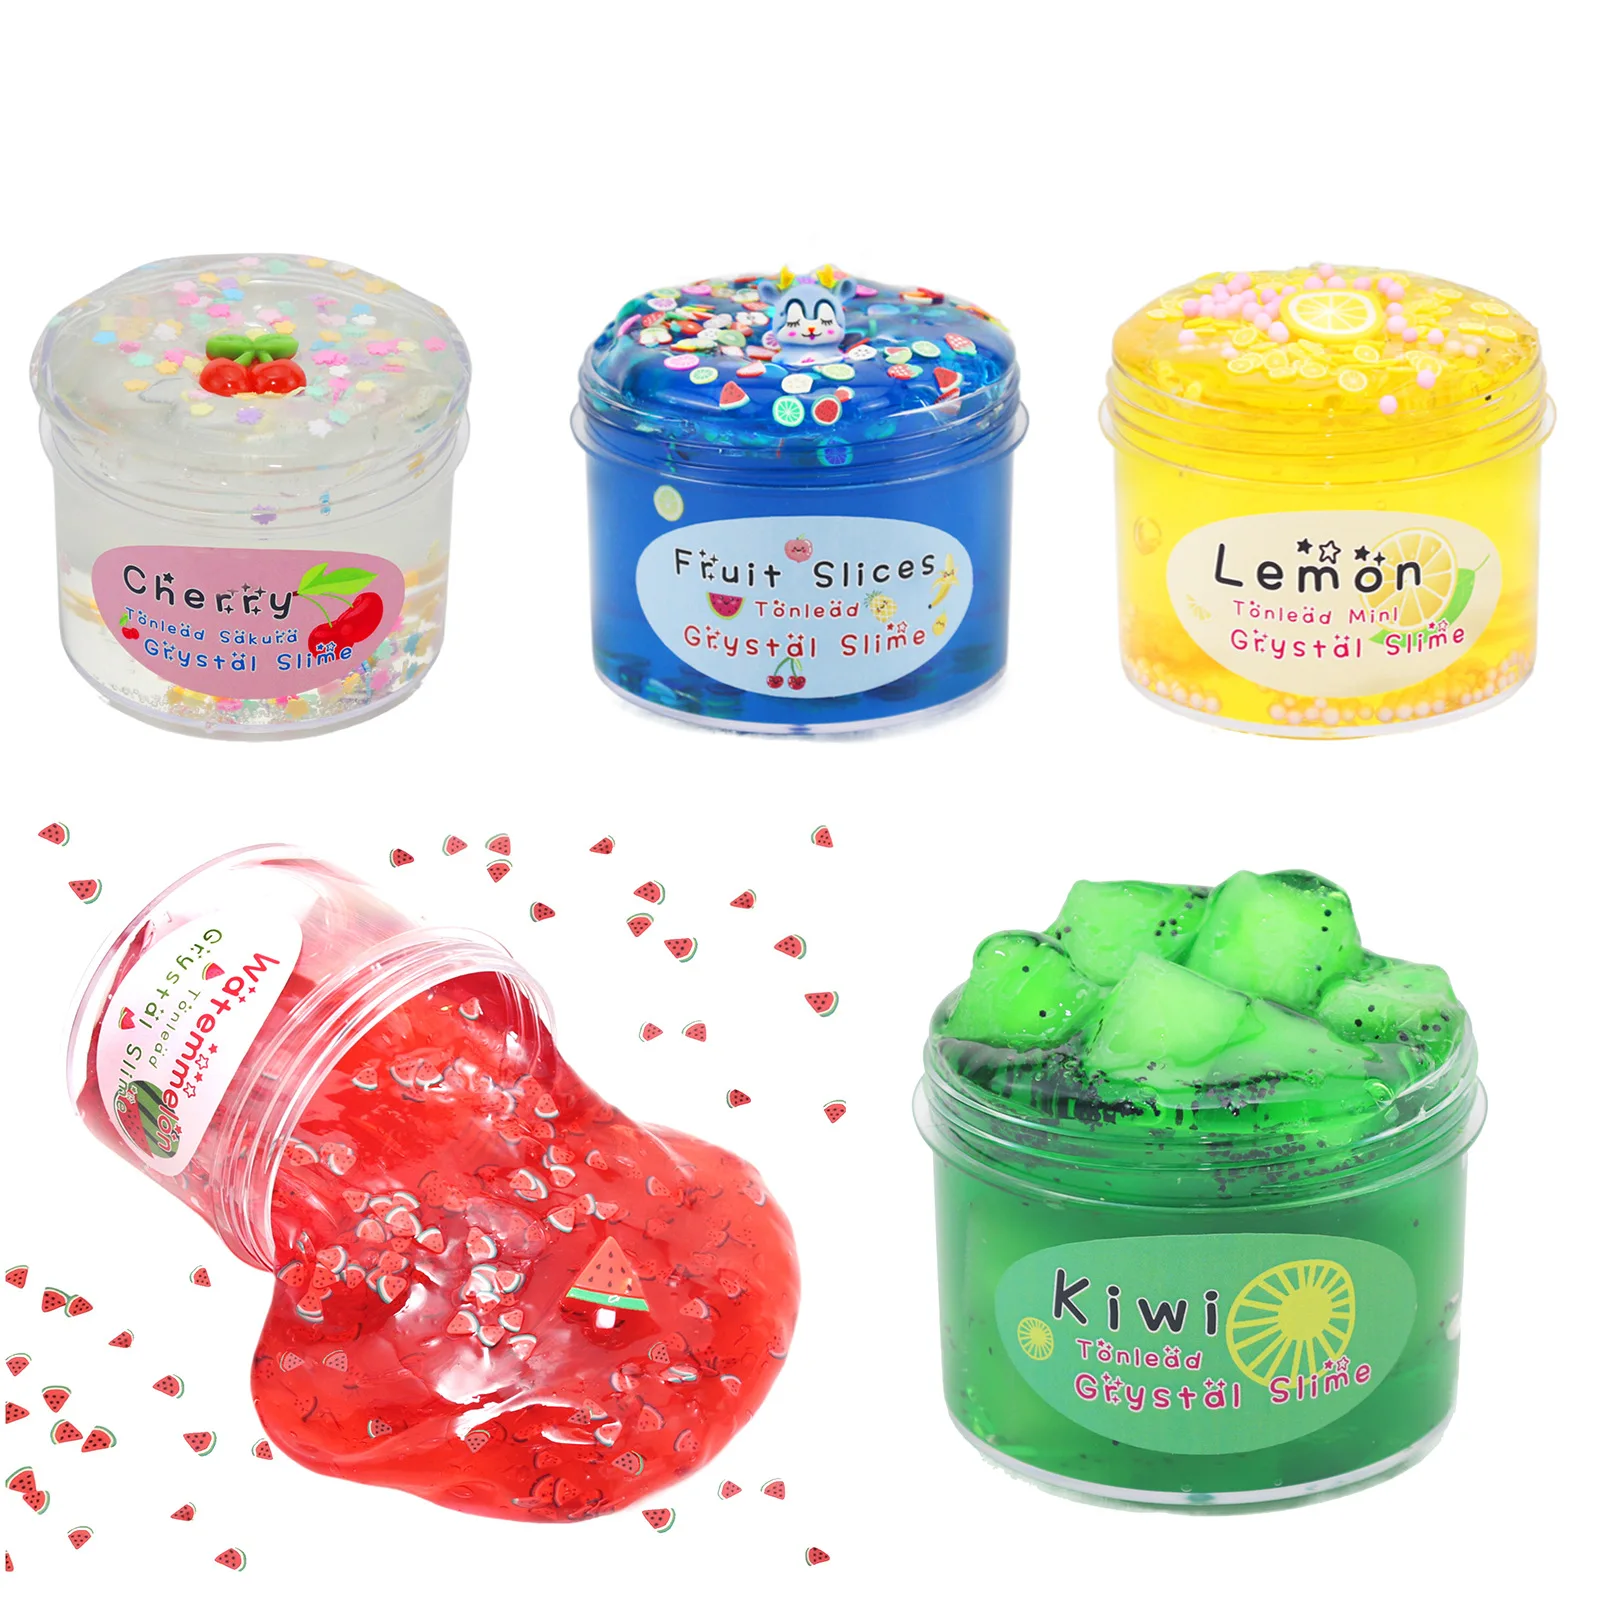 https://ae01.alicdn.com/kf/S1352b7750c1c4e69aae0849980daf1ebc/70ML-Slime-For-Kids-Clear-Scented-Crystal-Fluffy-Stretchy-Soft-Putty-Stress-Relief-Toys-Fake-Candy.jpg